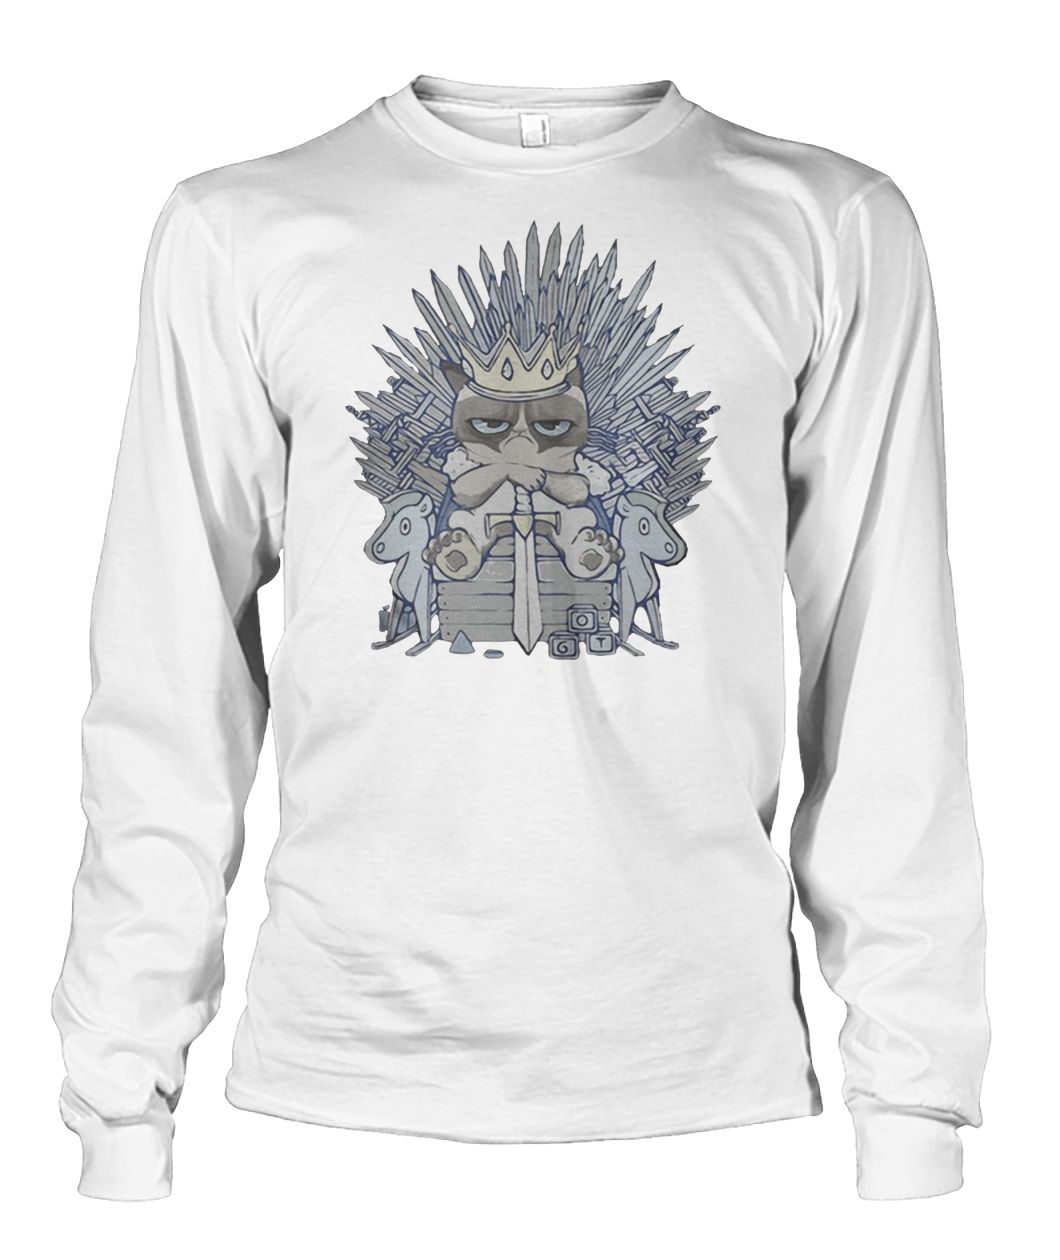 Game of thrones cat on the iron throne unisex long sleeve